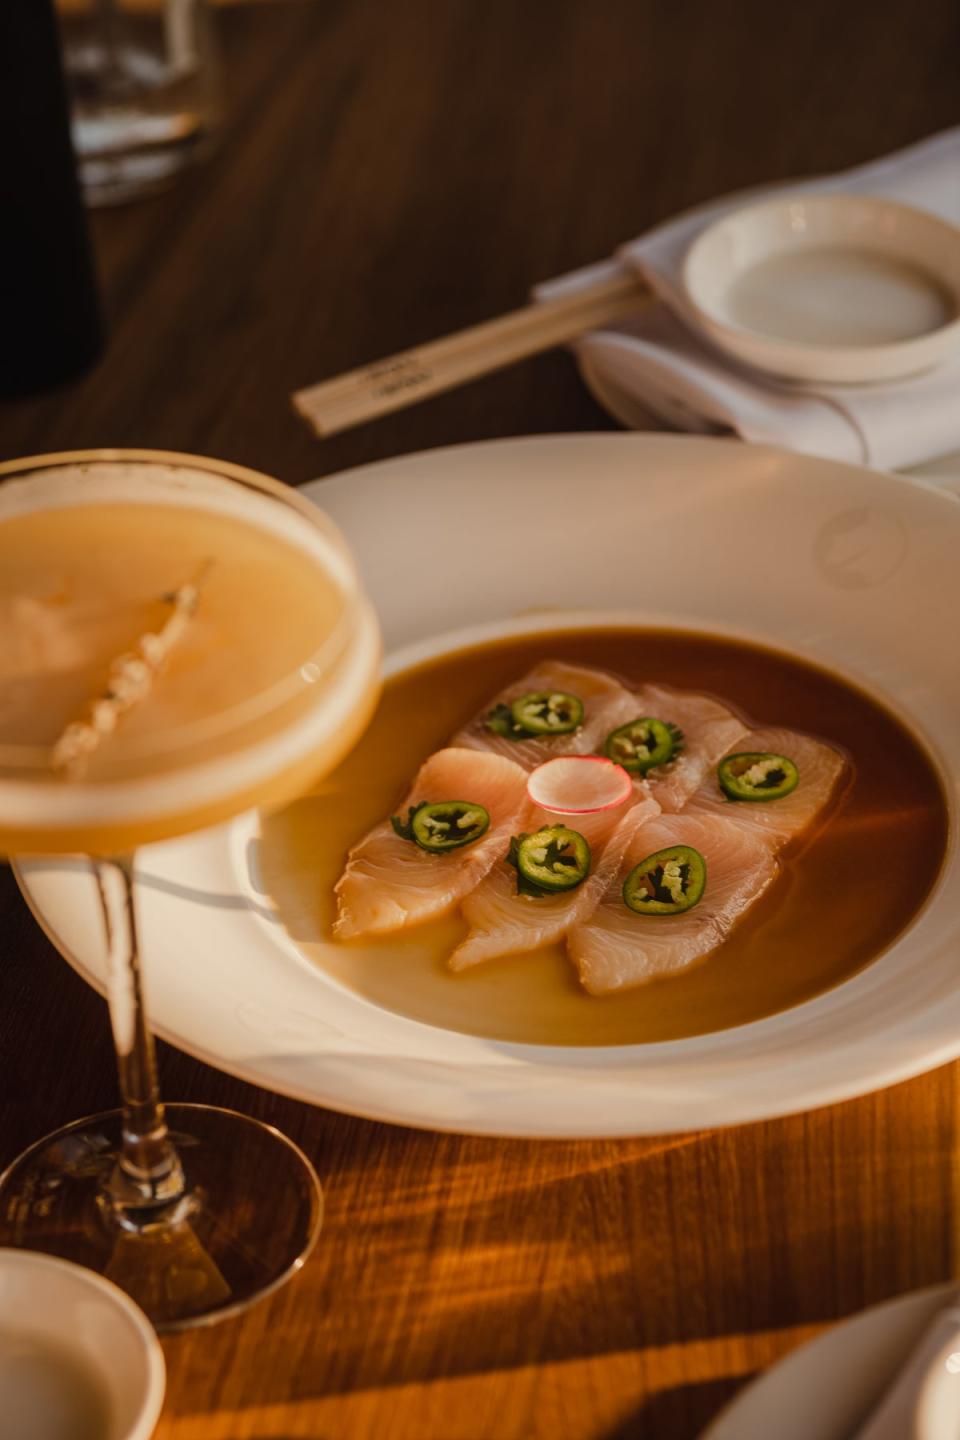 Chic dining is par for the course at Nobu (Nobu)